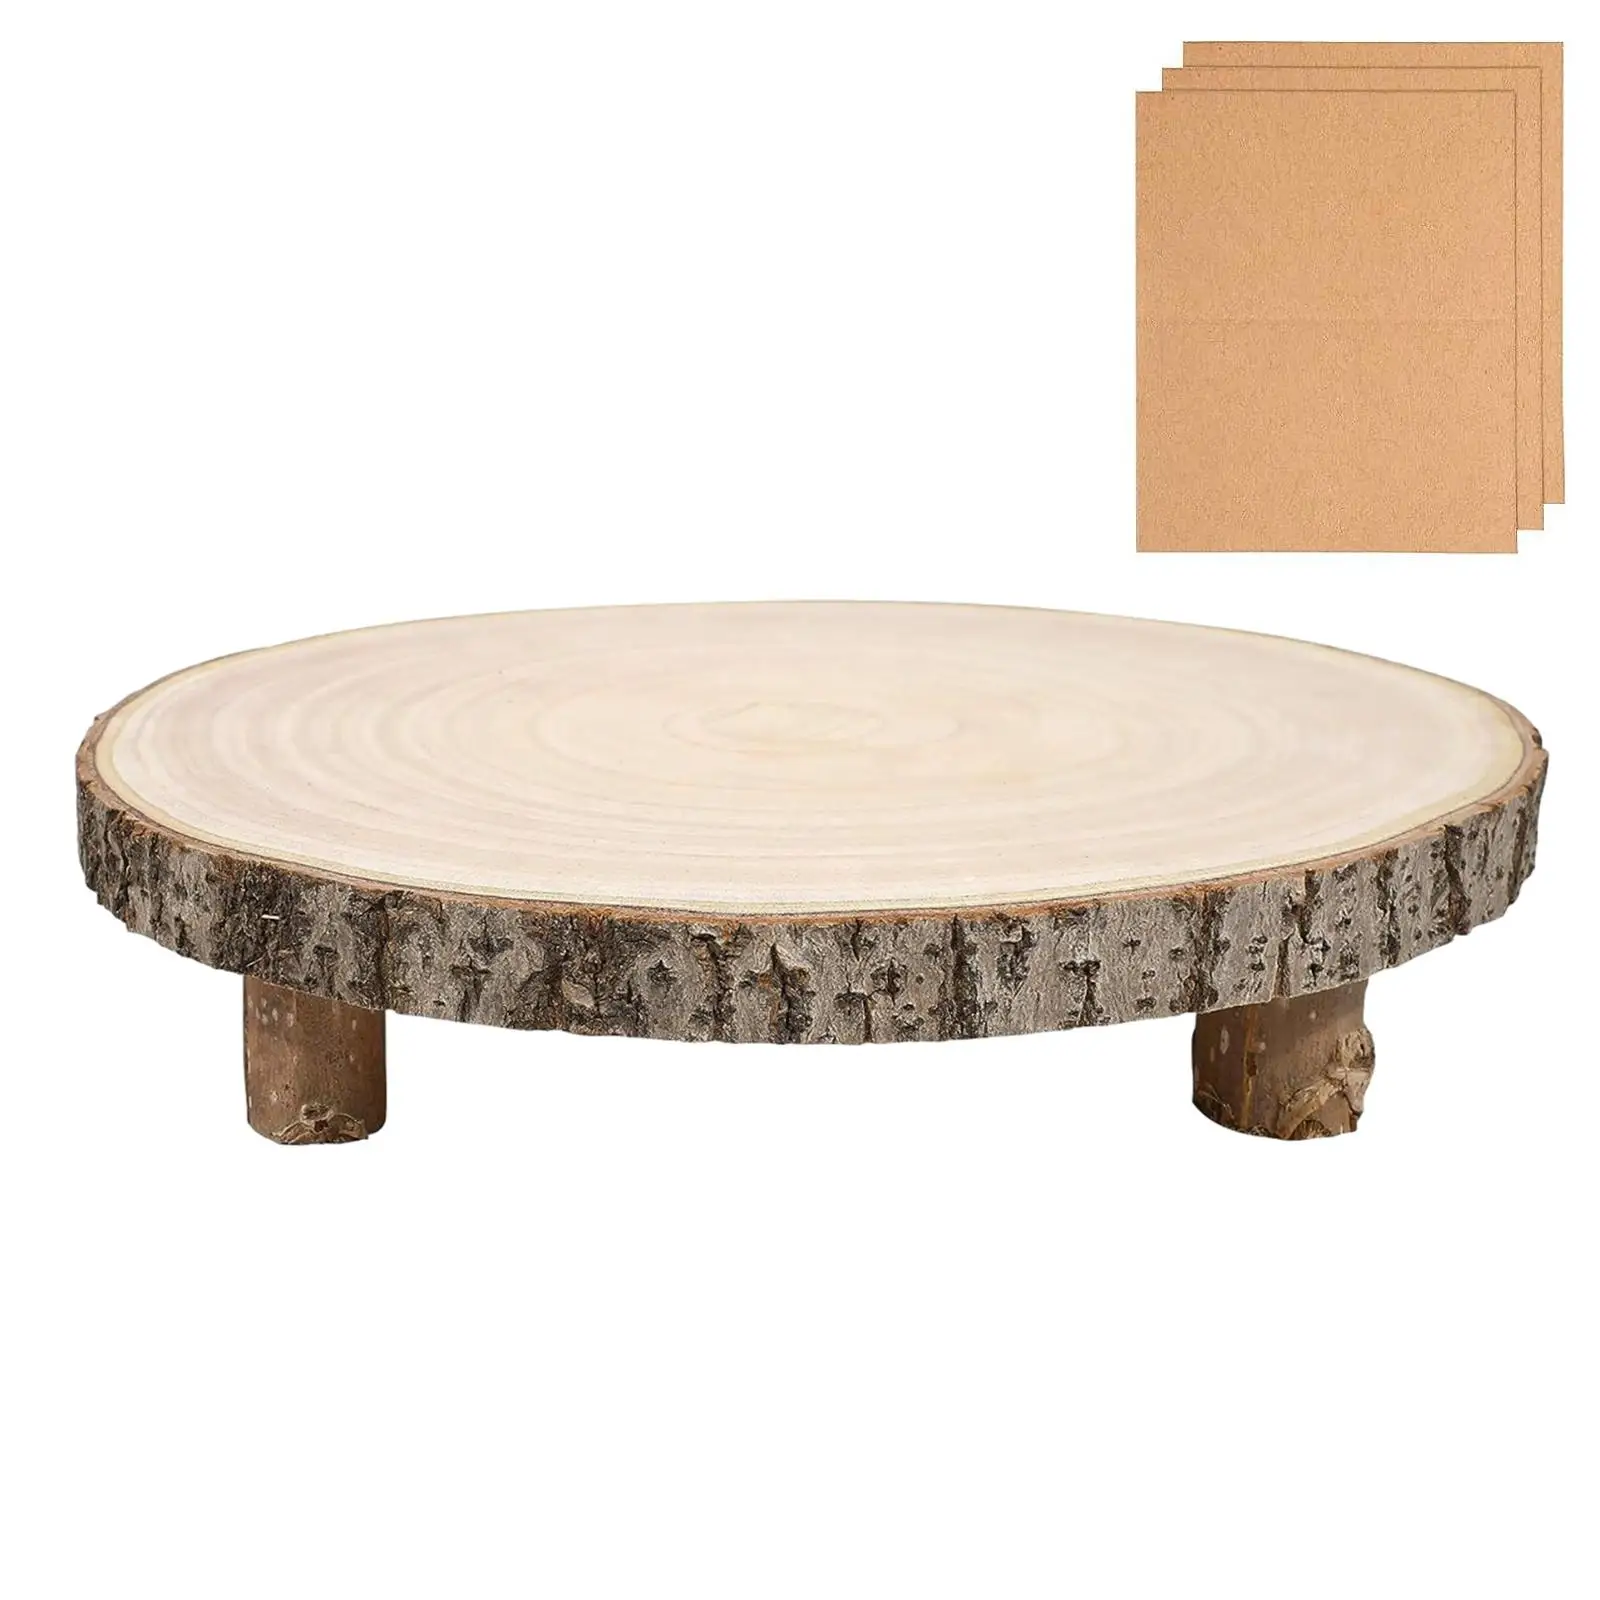 Wood Cake Stand Dessert 11inch Home Wedding Cake and Cheese Board Decoration